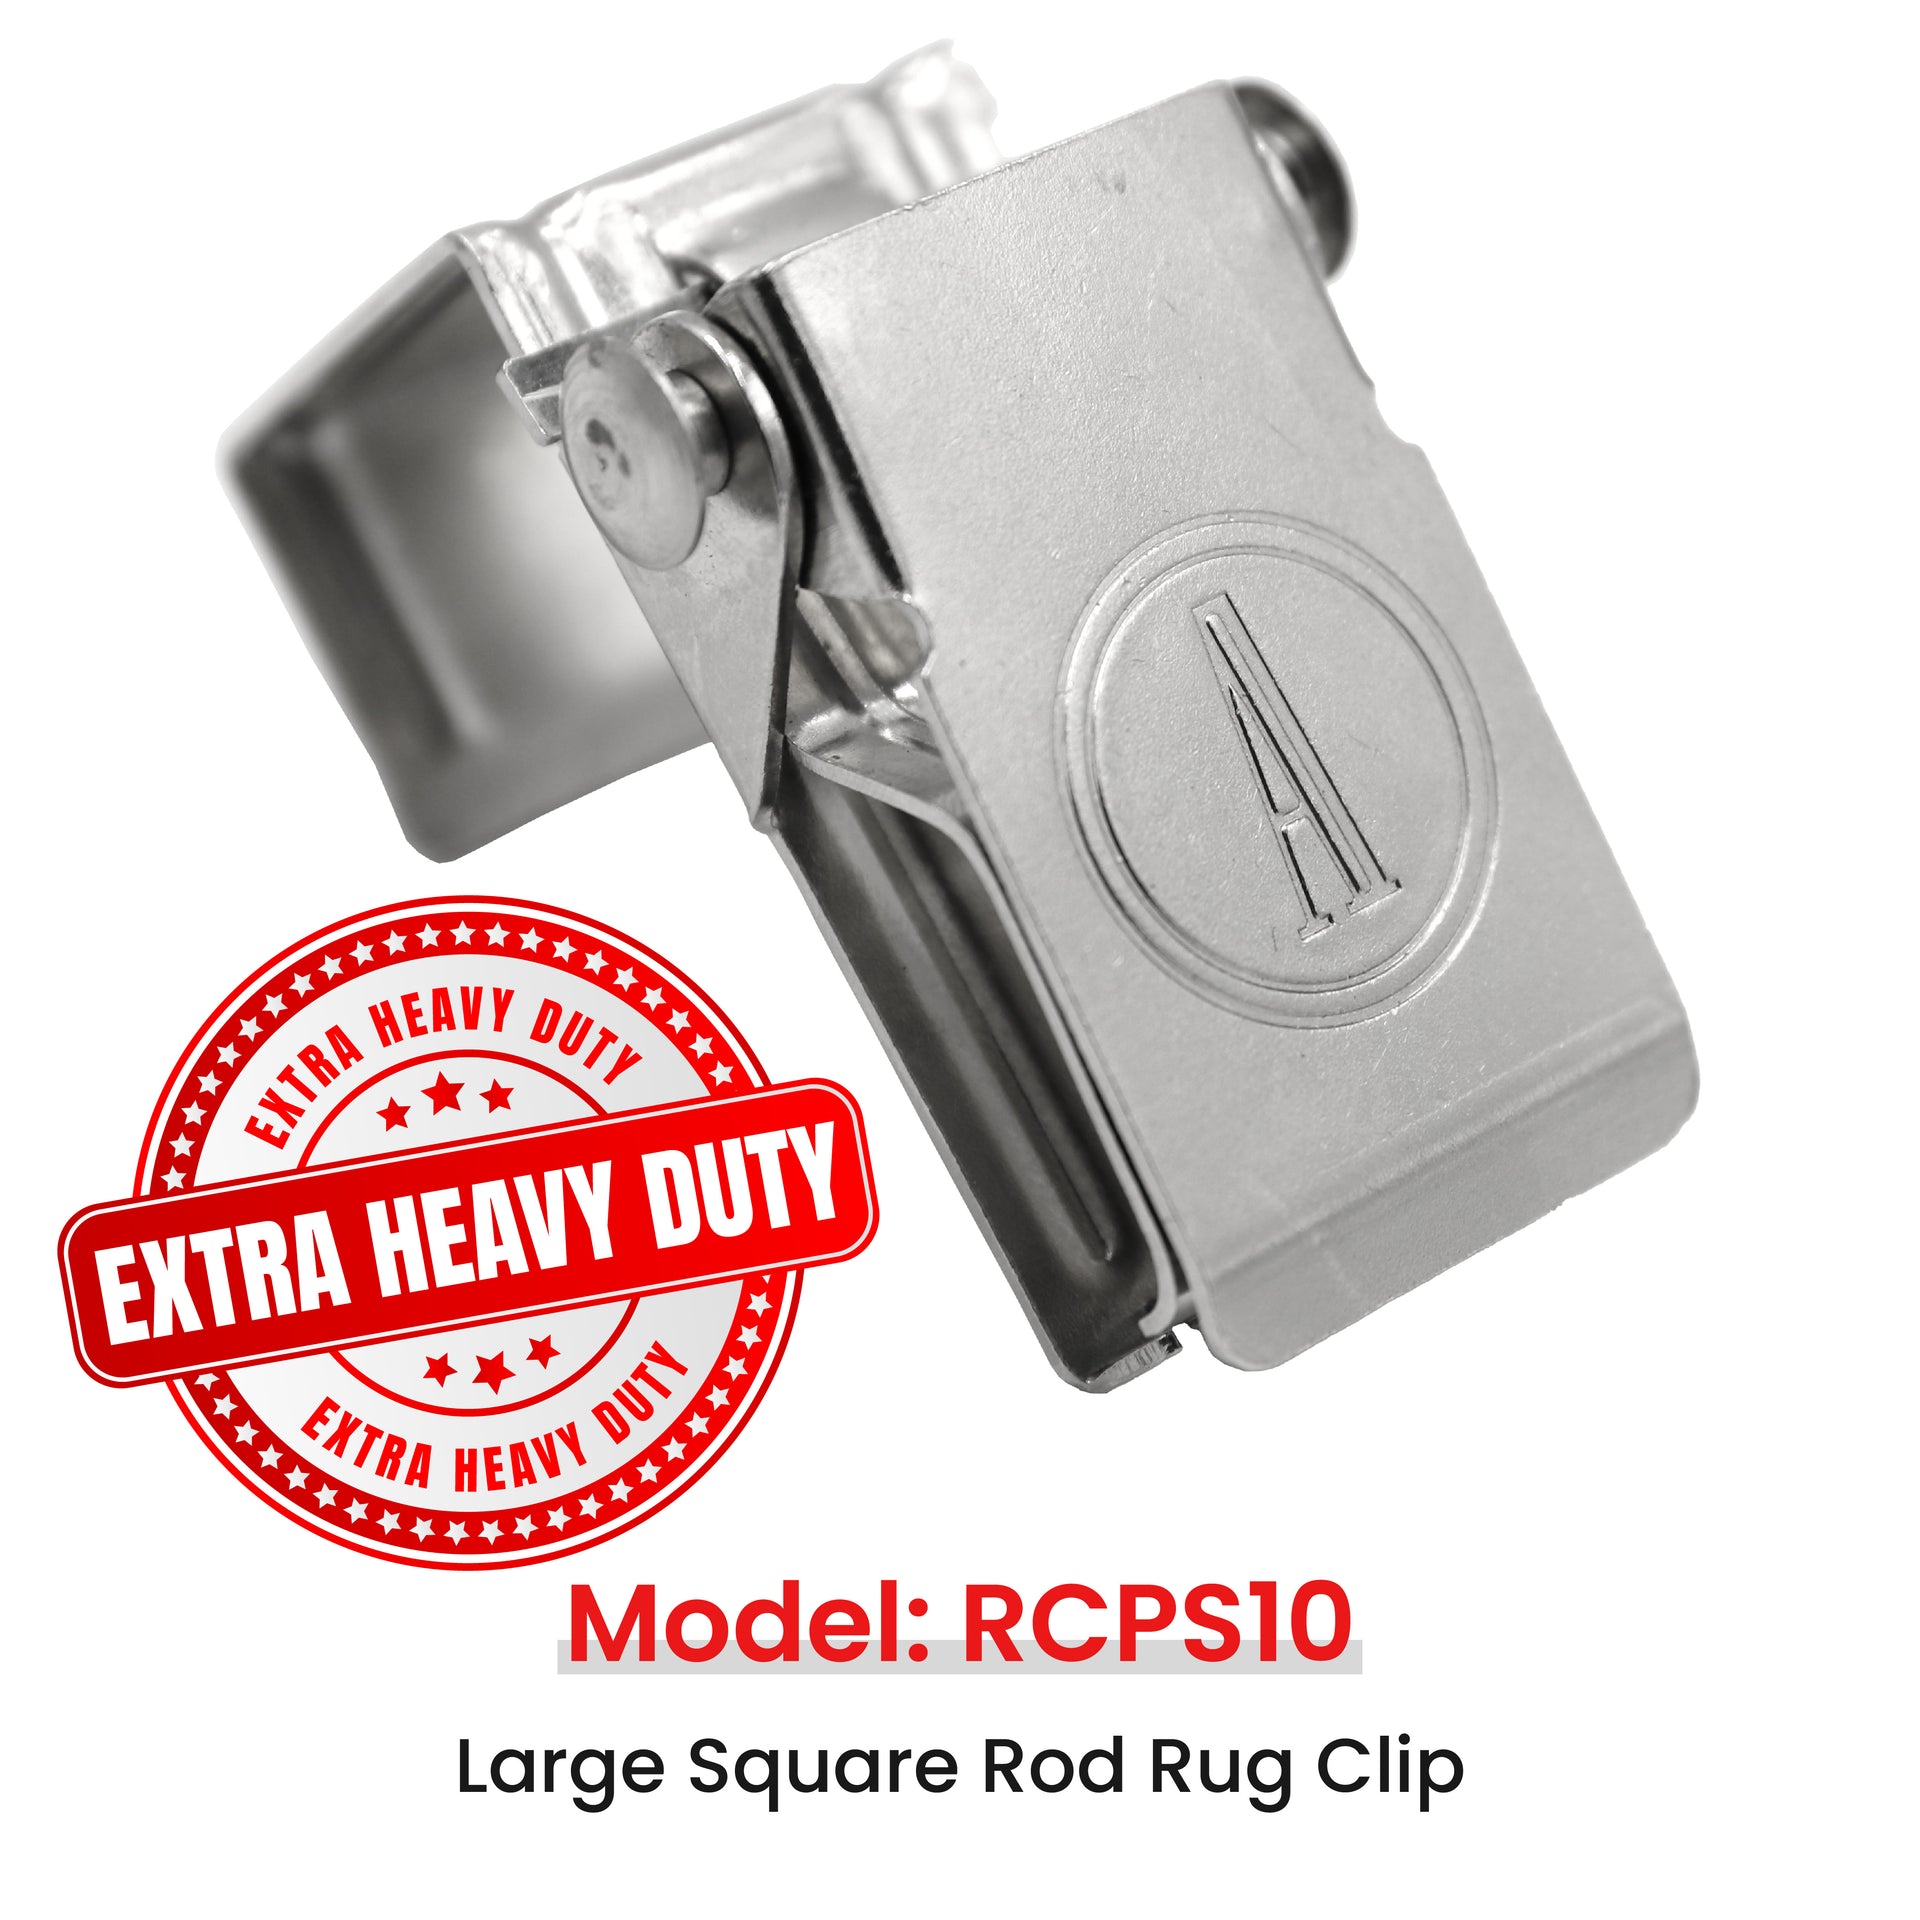 Functional Strong Heavy-duty Rust-proof tapestry hanger clips 